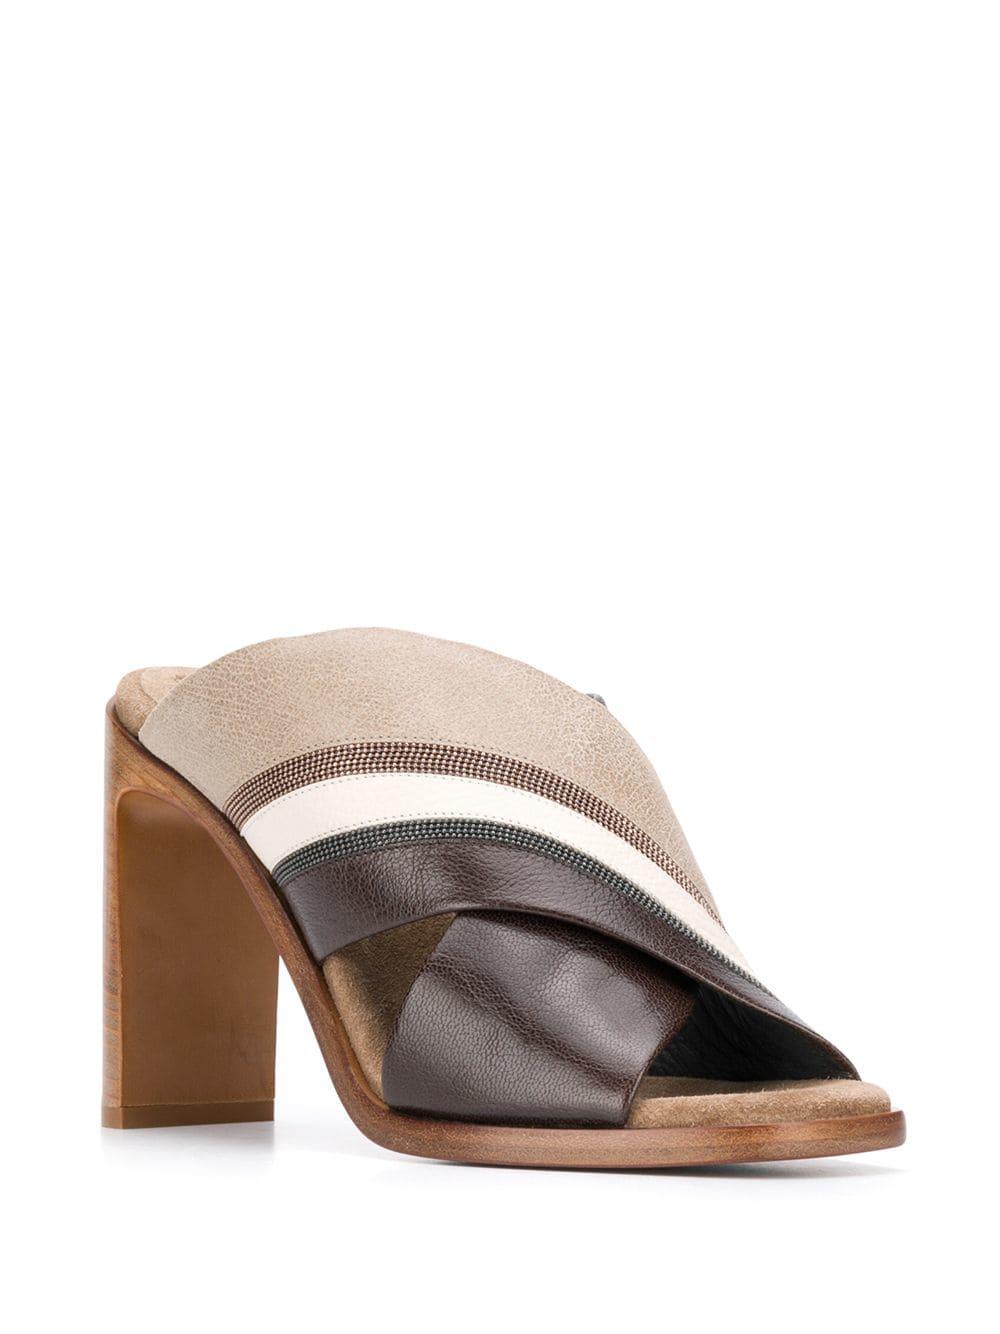 Brunello Cucinelli Leather Double Strap Mules in Brown - Lyst